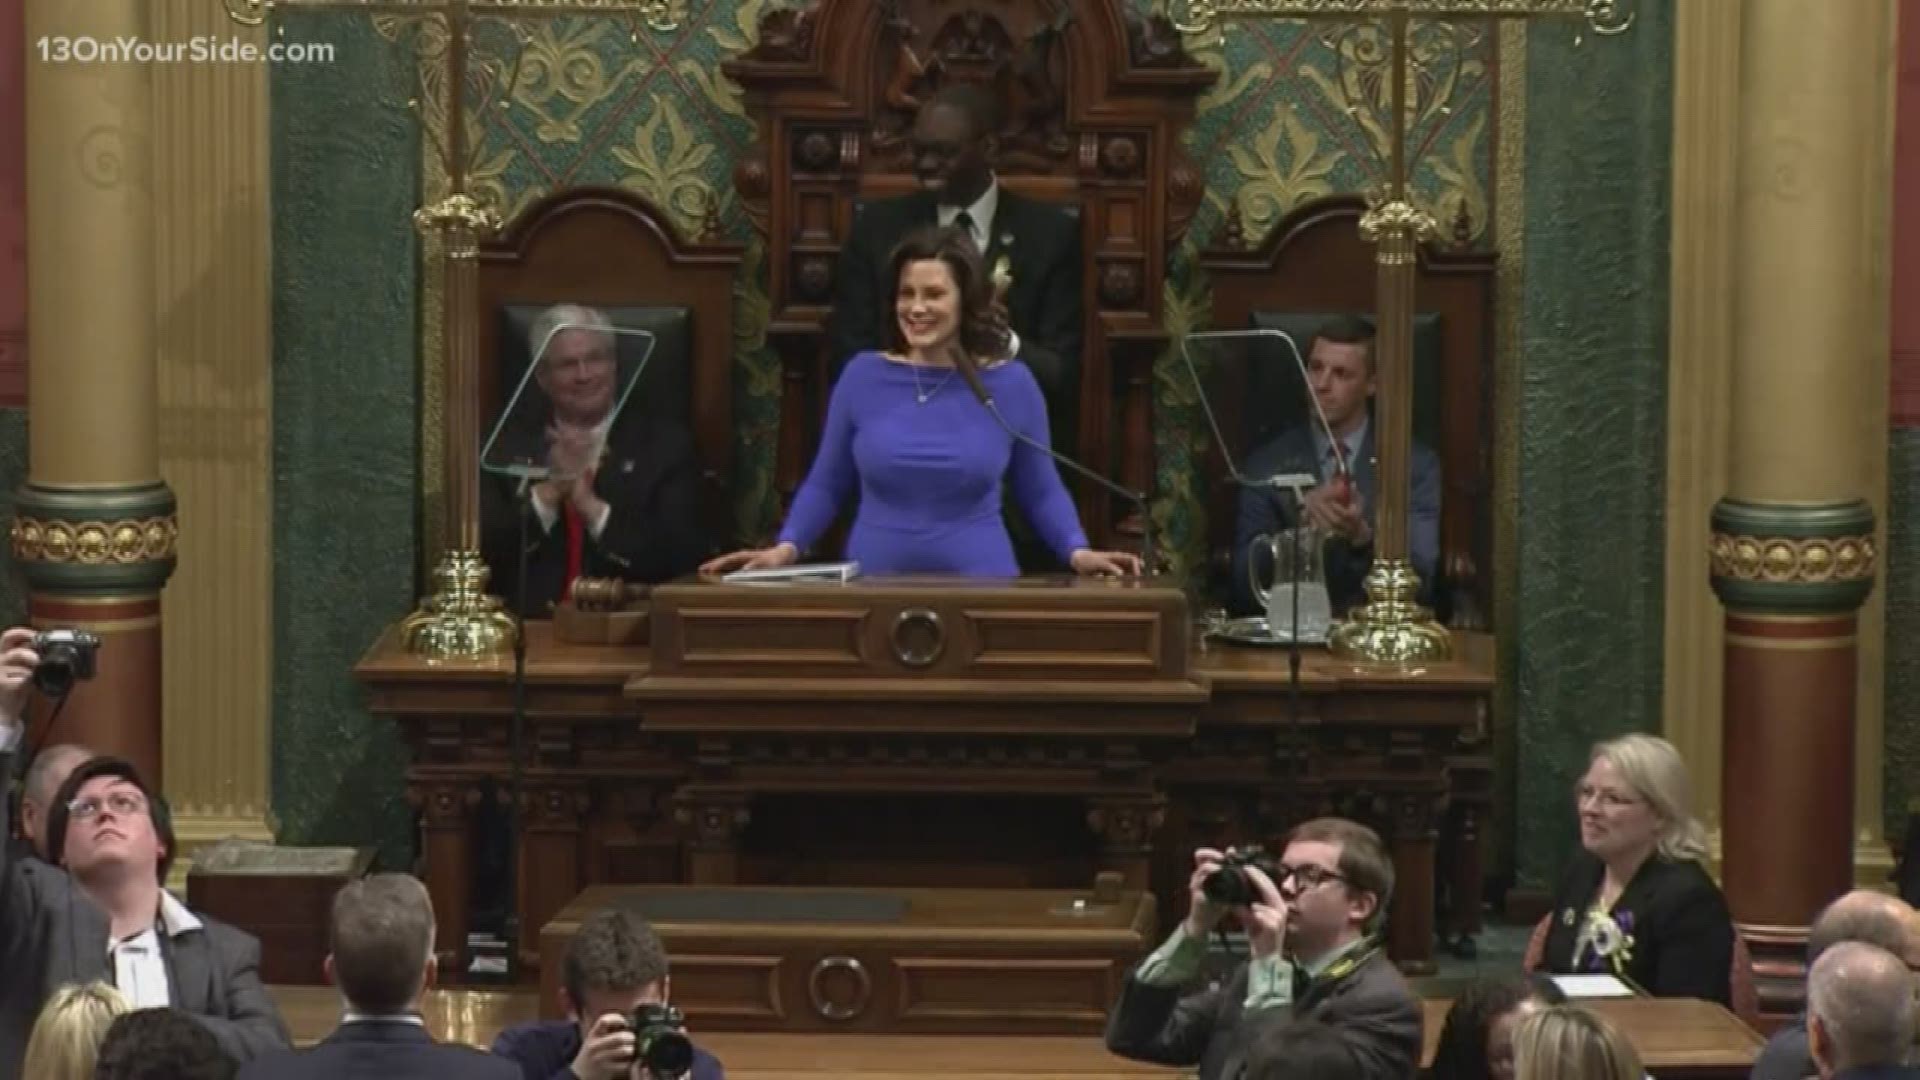 Gov. Gretchen Whitmer will deliver her State of the State address Wednesday, Jan. 29.